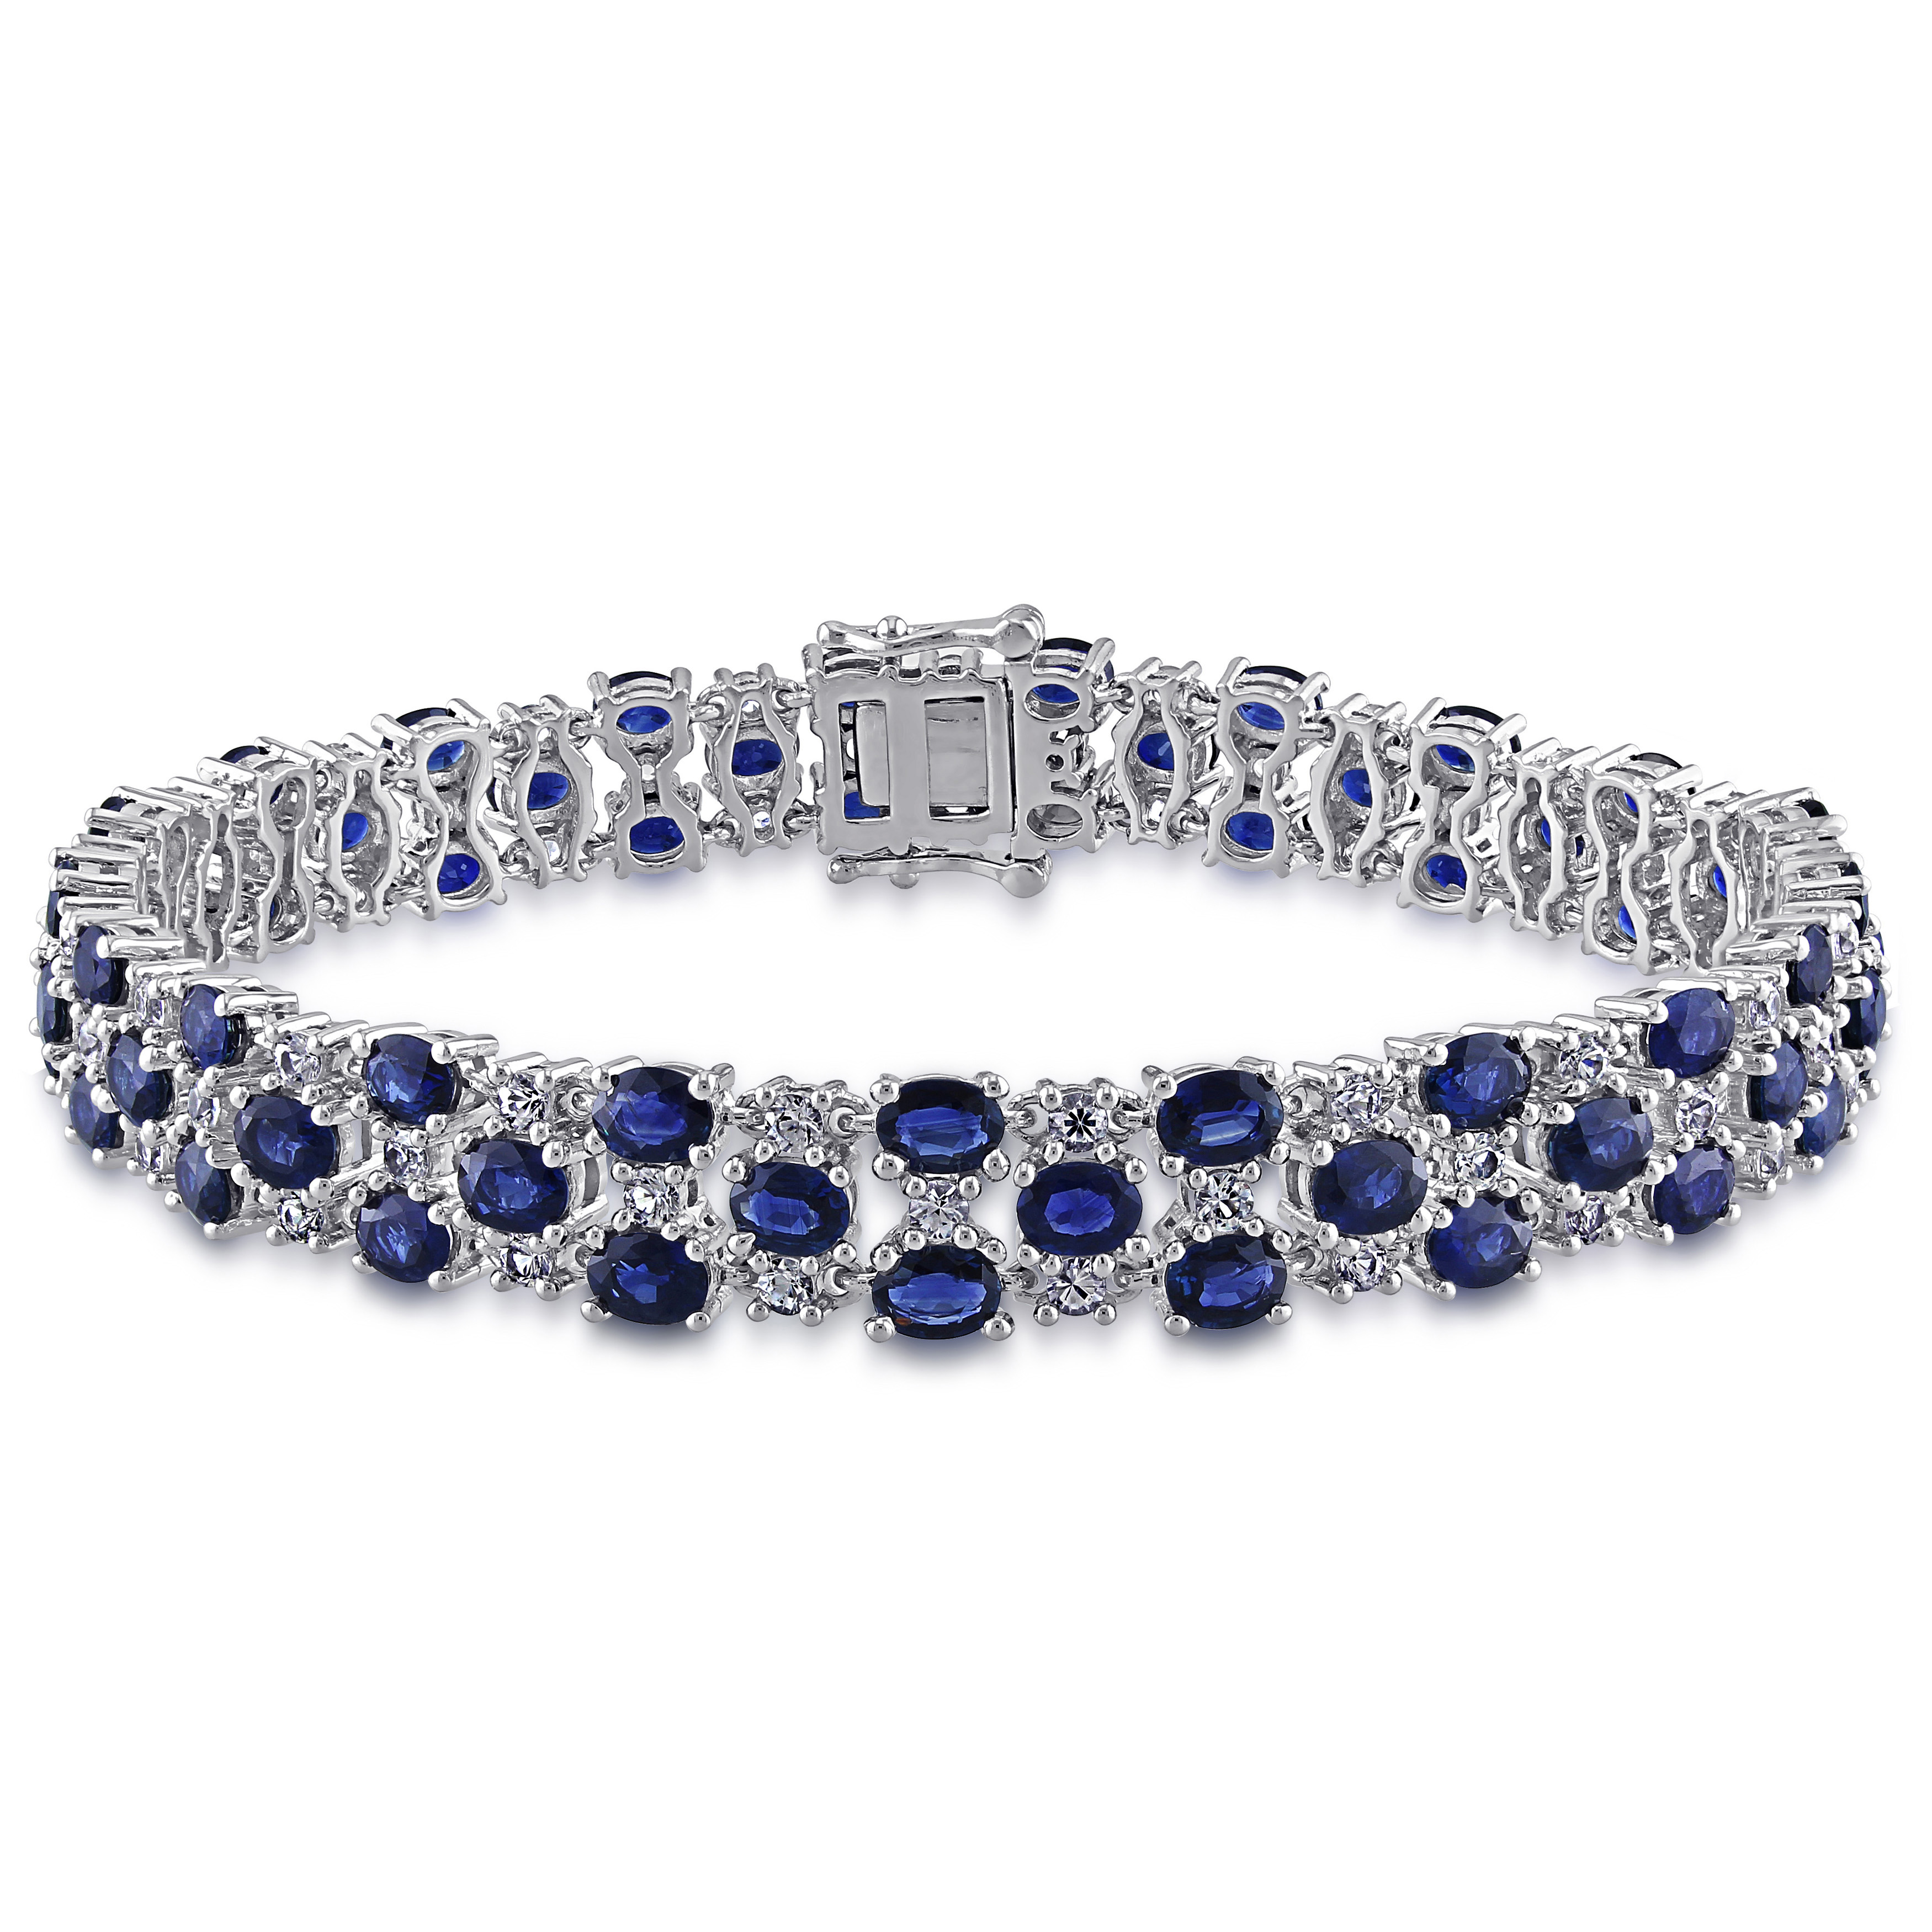 15 3/4 CT TGW Blue and White Sapphire Bracelet in 14K White Gold